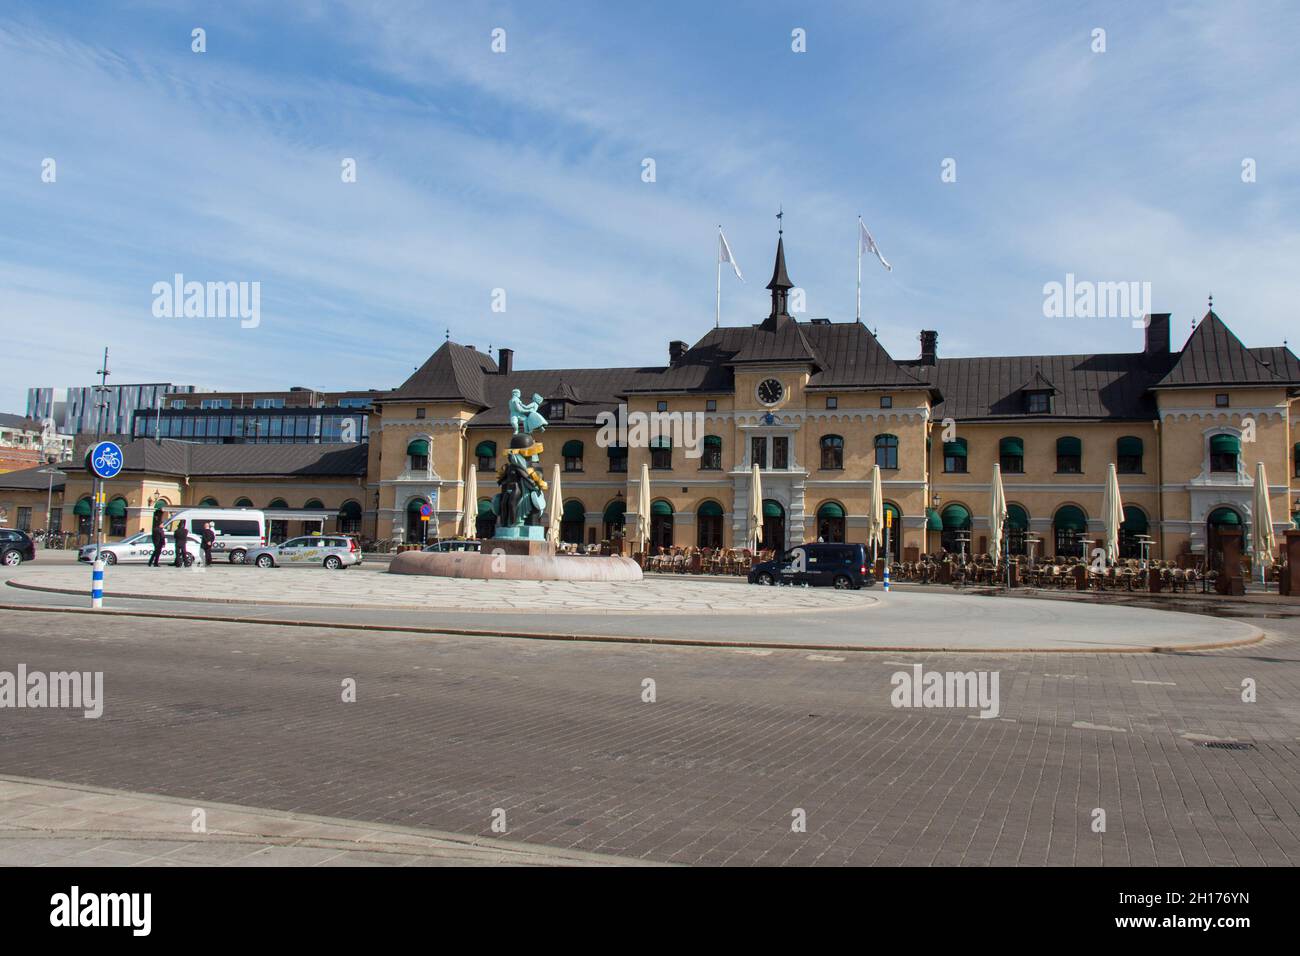 Sweden, Uppsala - April 19 2019: front view of the central railway station old building on April 19 2019 in Uppsala, Sweden. Stock Photo